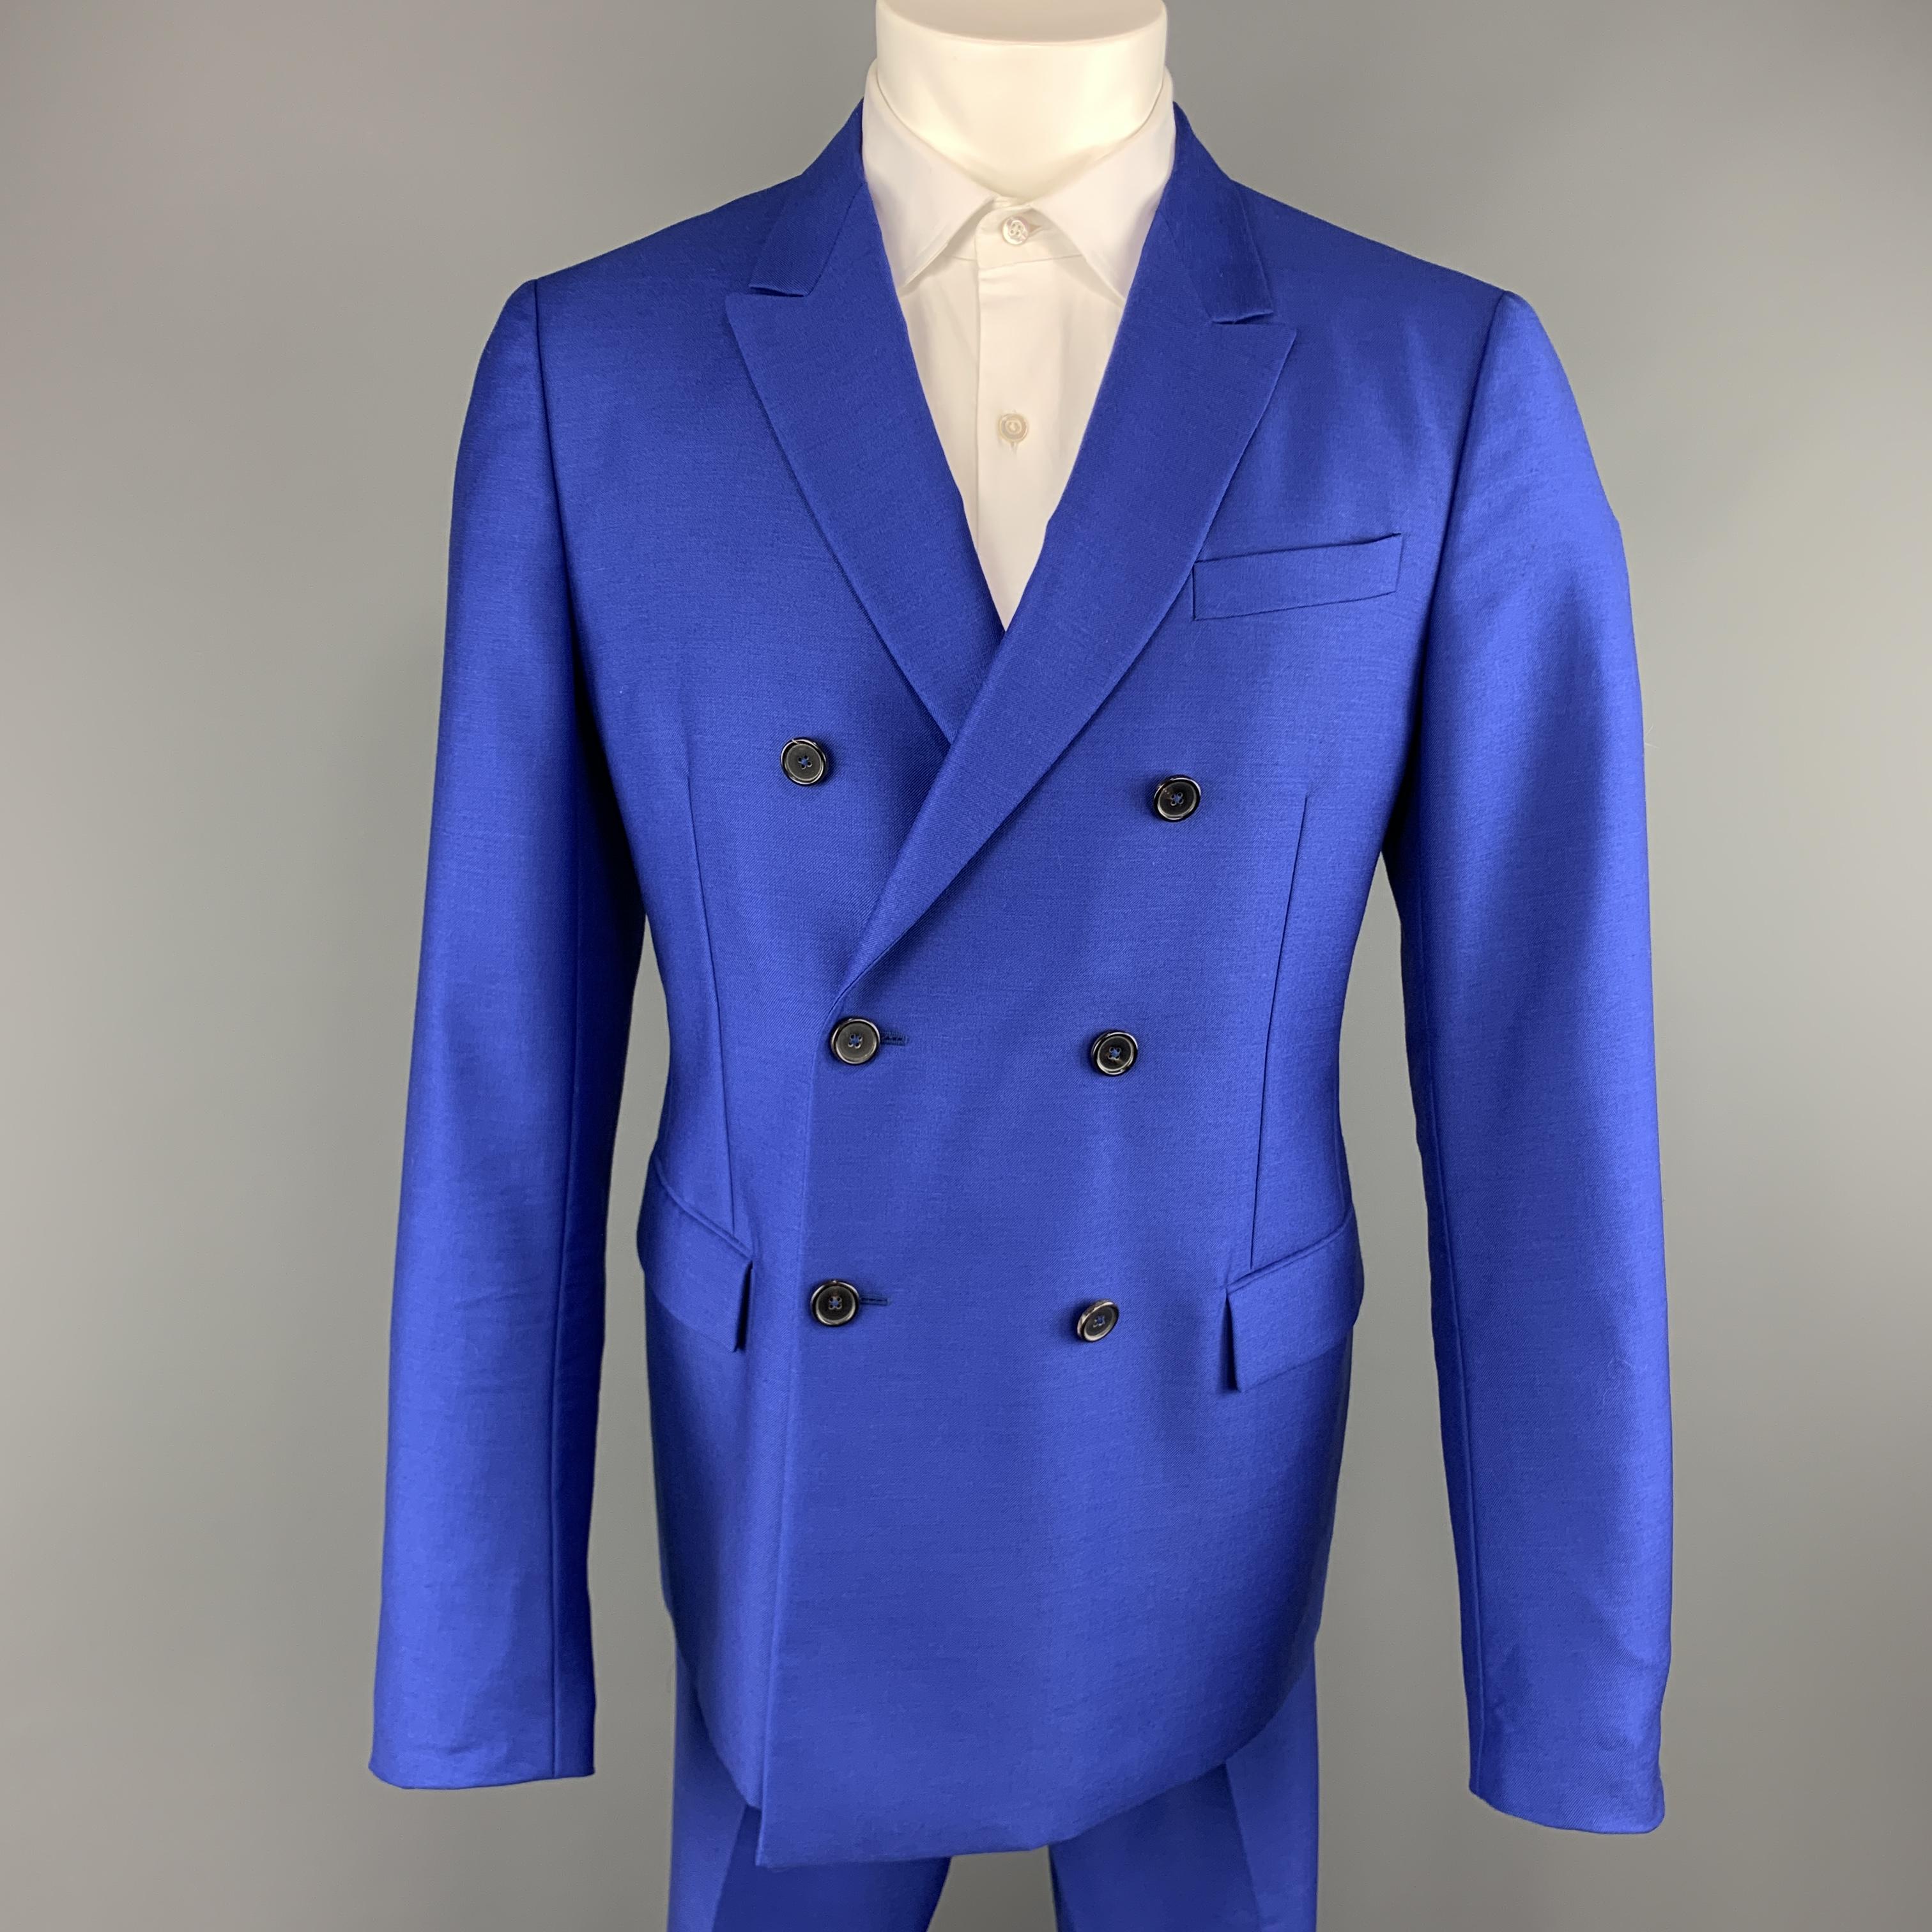 JIL SANDER by RAF SIMONS suit comes in bold royal blue mohair wool blend twill and includes a double breasted, peak lapel sport coat and matching flat front, cuffed hem trousers. Made in Italy.
 
Excellent Pre-Owned Condition.
Marked: IT 52
